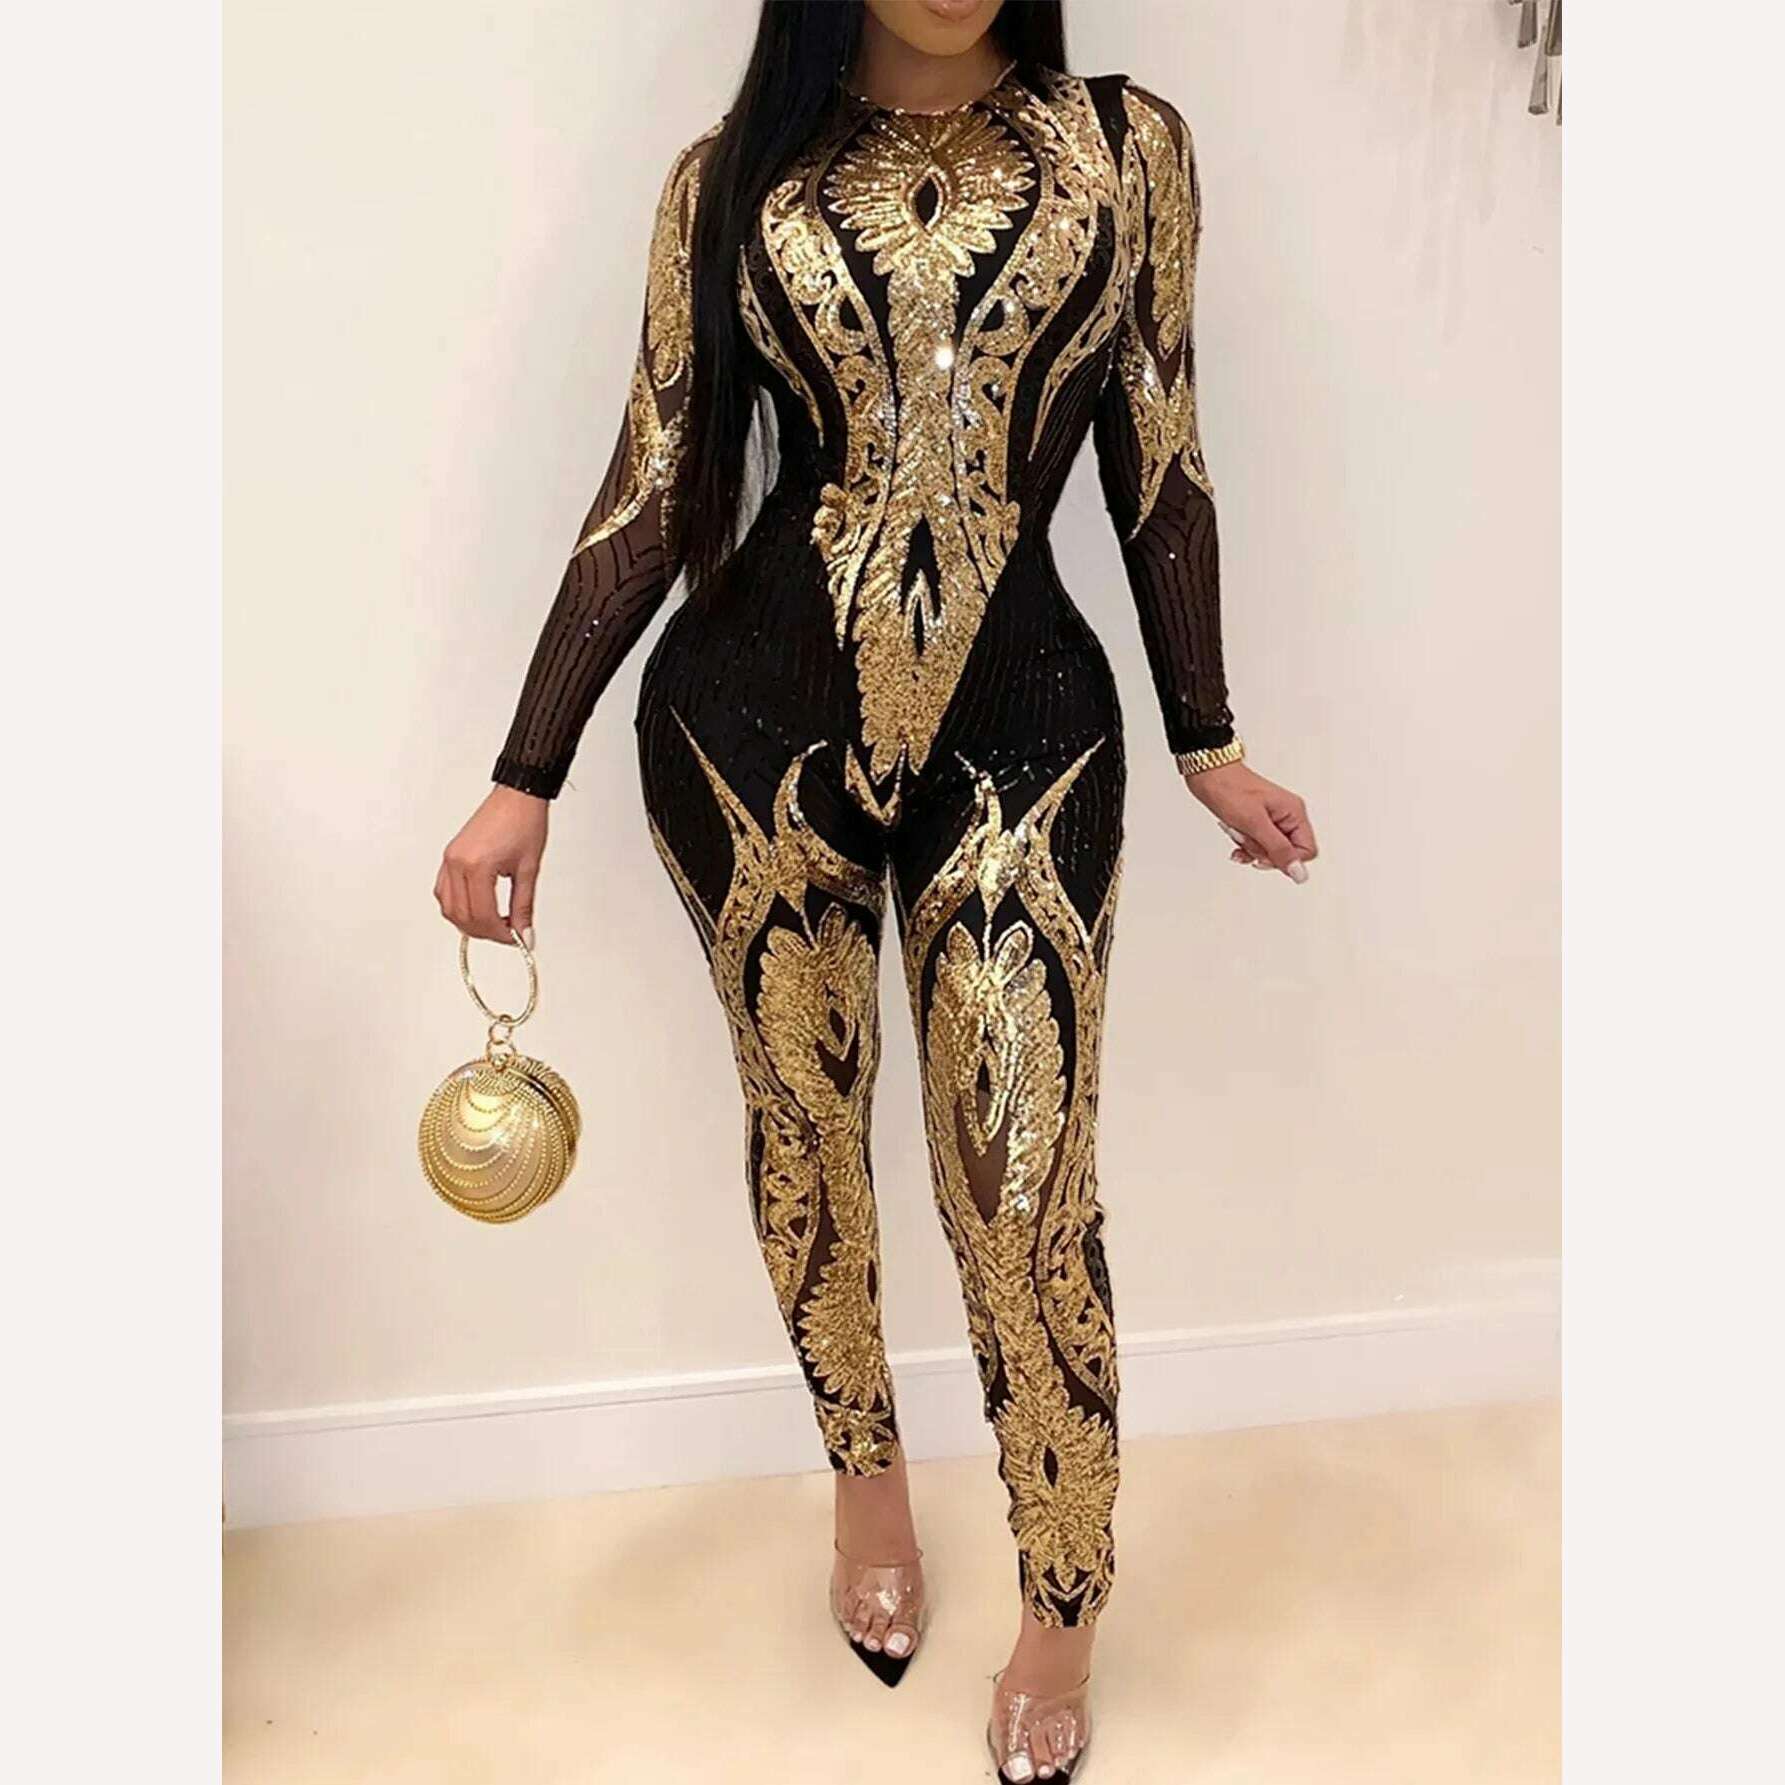 KIMLUD, Sexy Long sleeve Sequin bodycon jumpsuit women body bodysuit one piece birthday party nightclub outfits womens jumpsuits overall, Gold / S, KIMLUD Women's Clothes